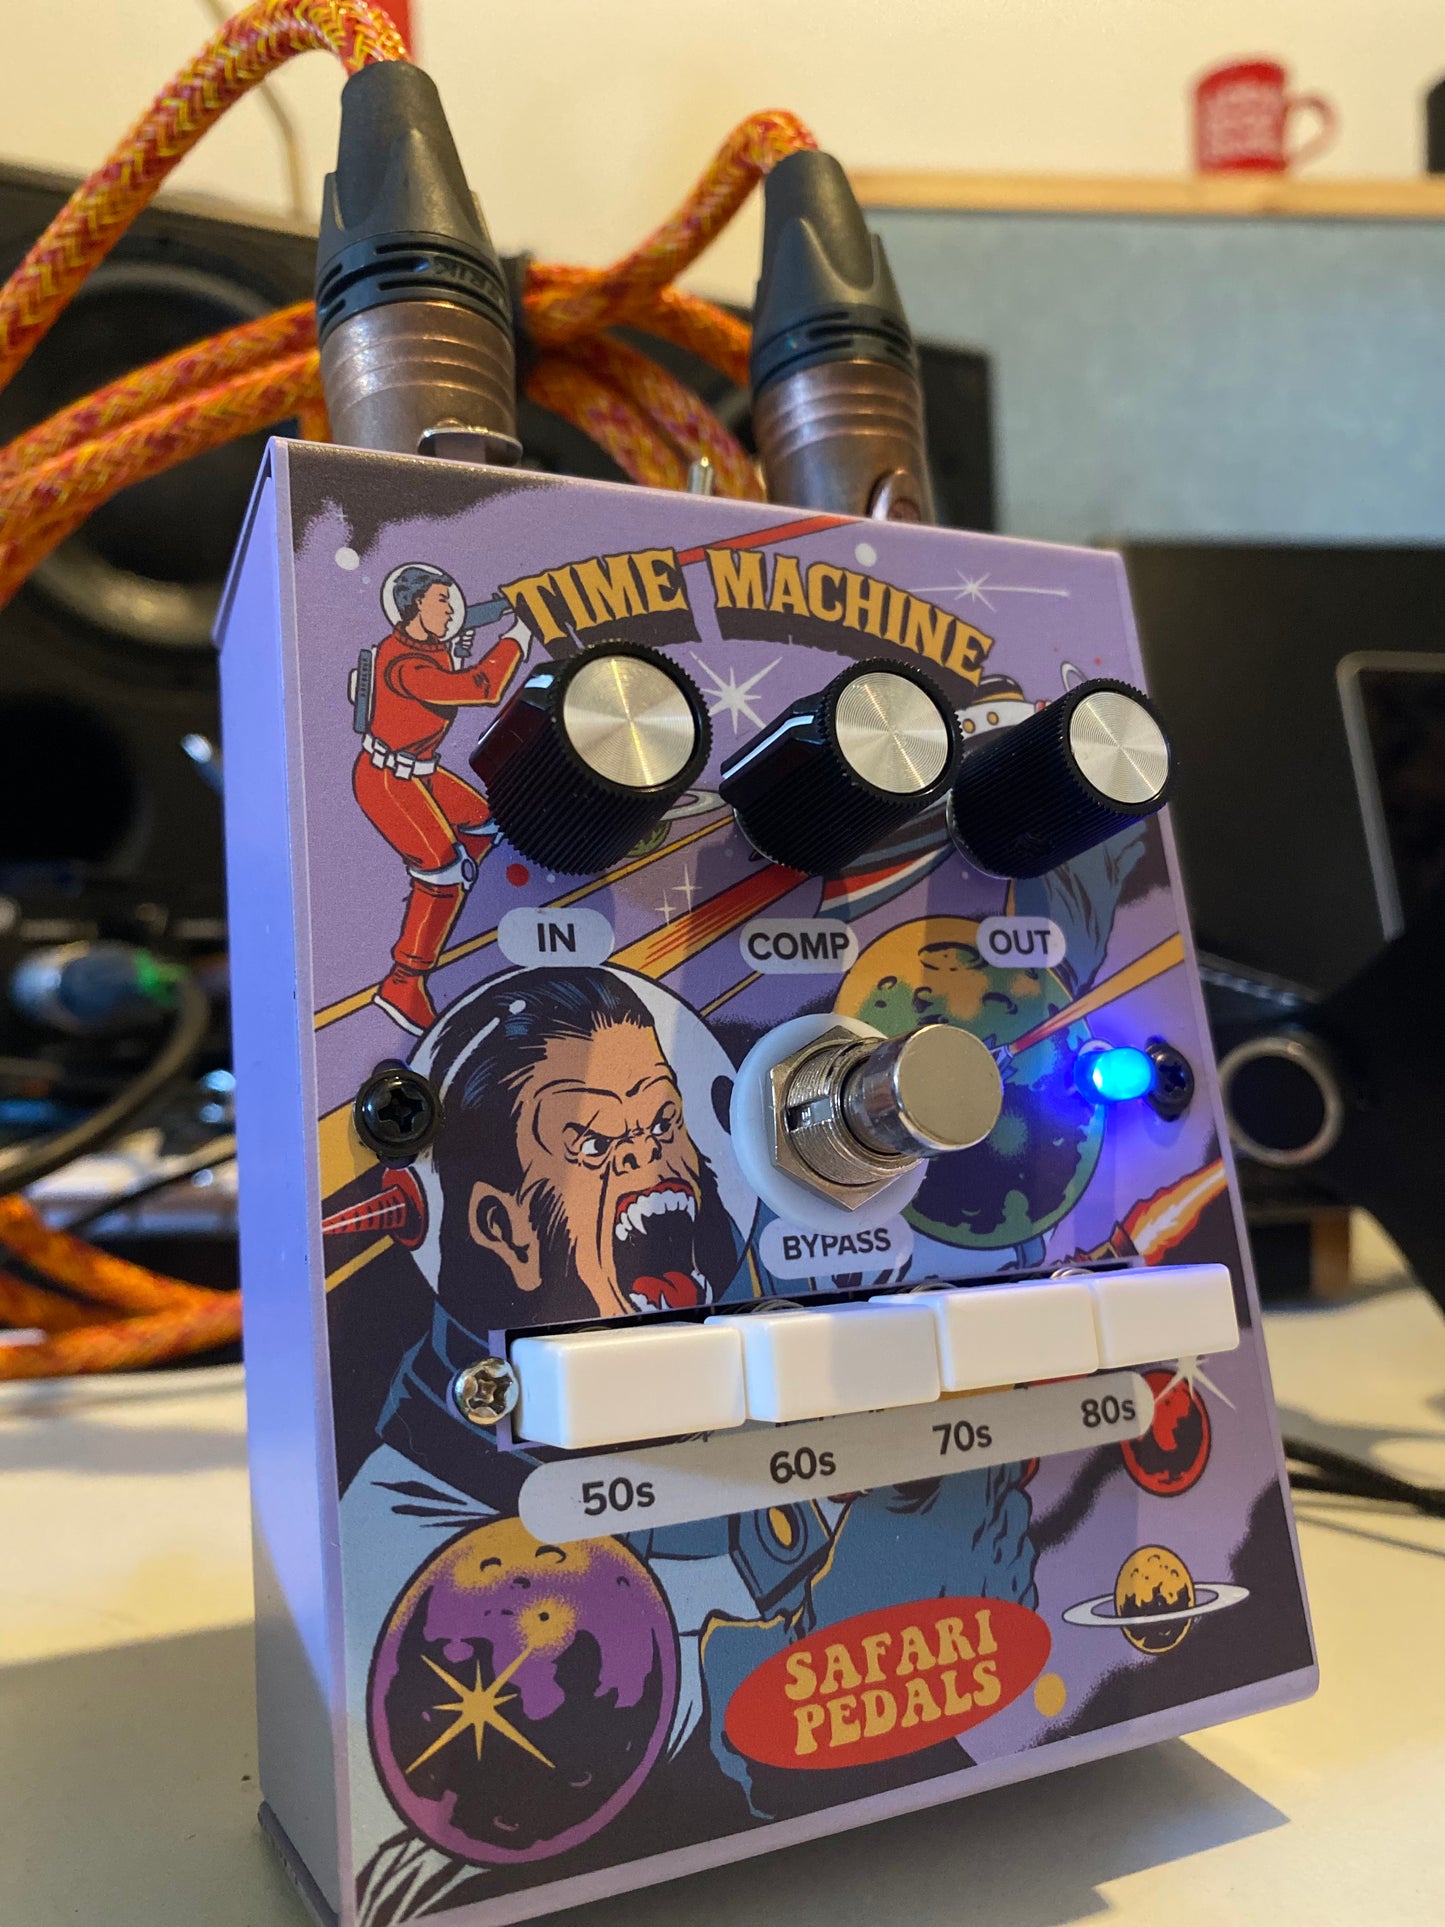 Time Machine hardware - Mic preamp and overdrive pedal with compression